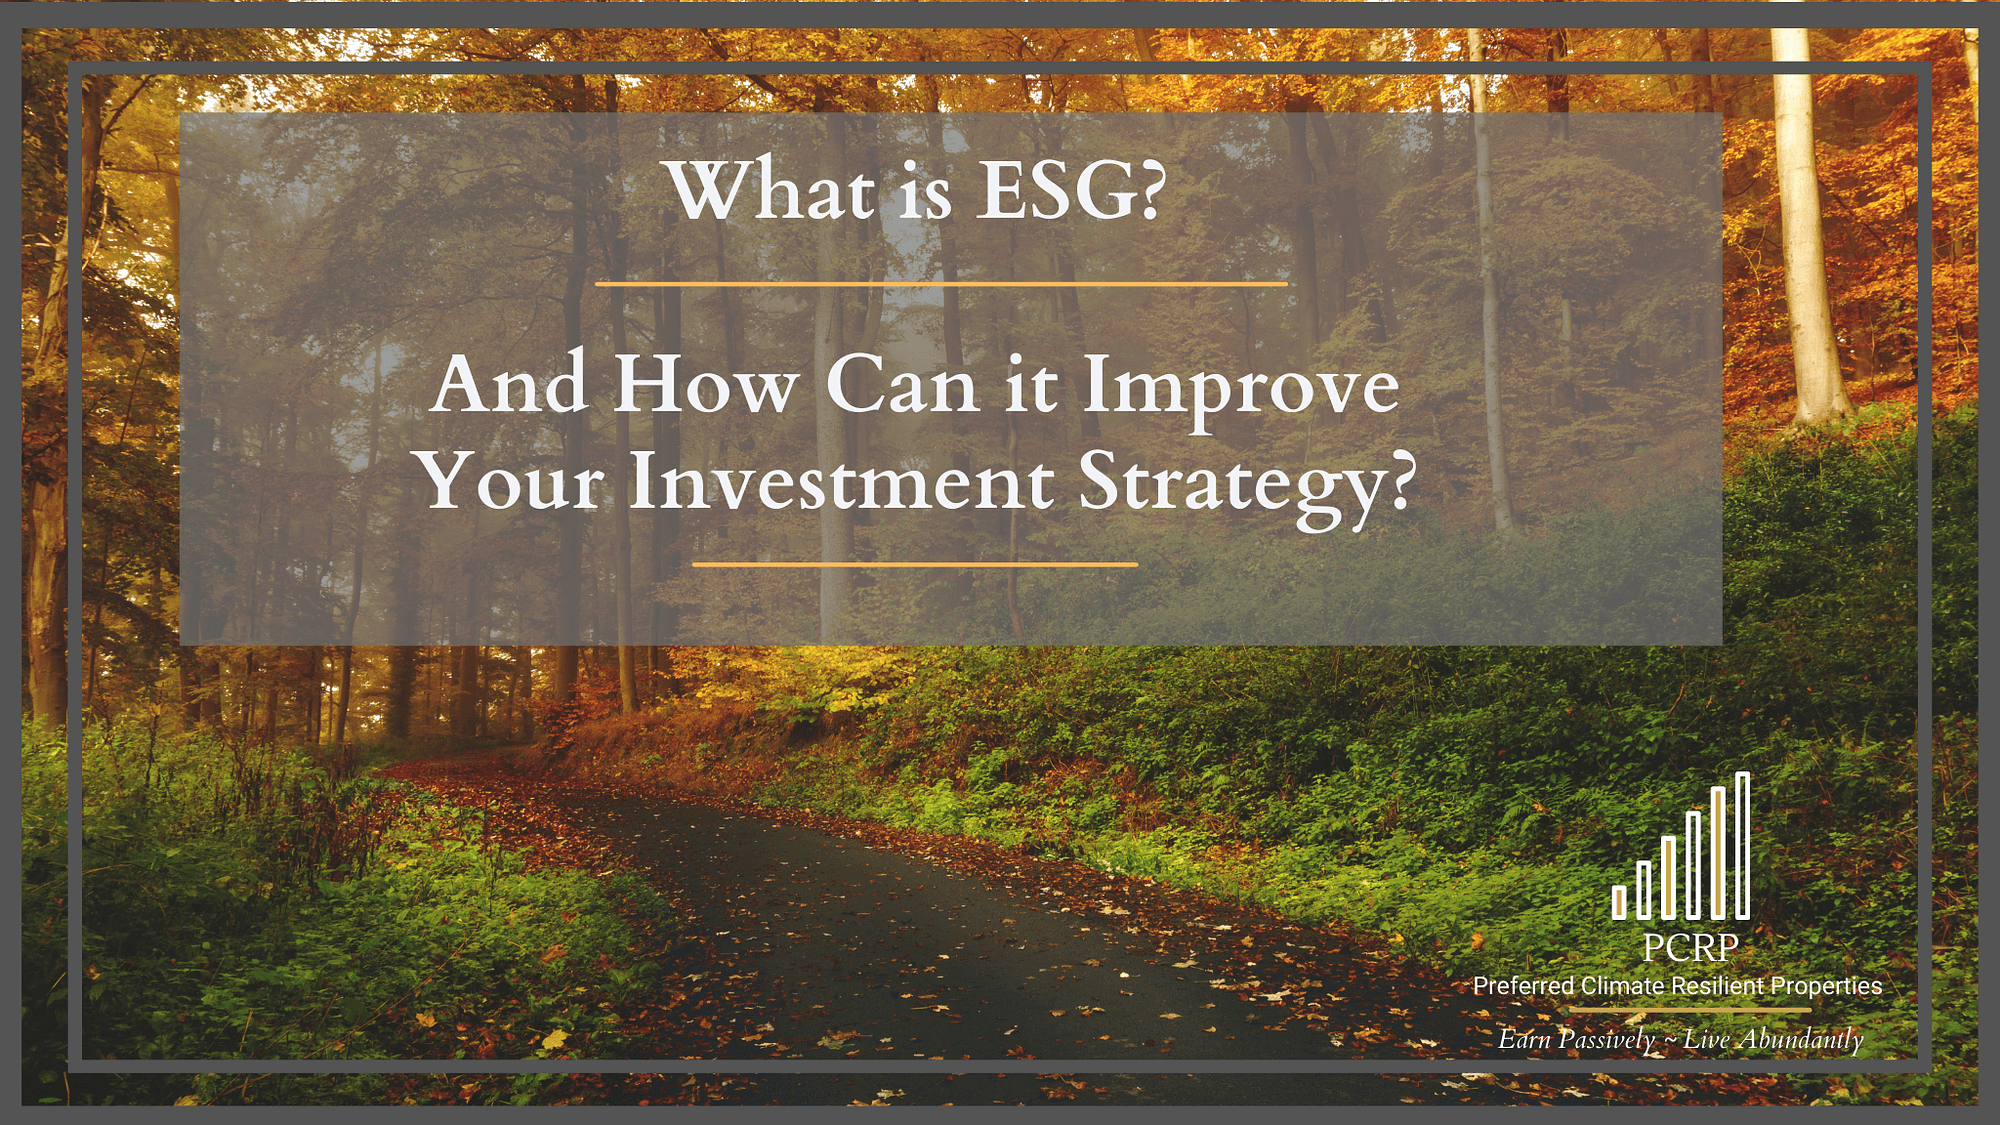 What is ESG and How Can it Improve Your Investment Strategy?